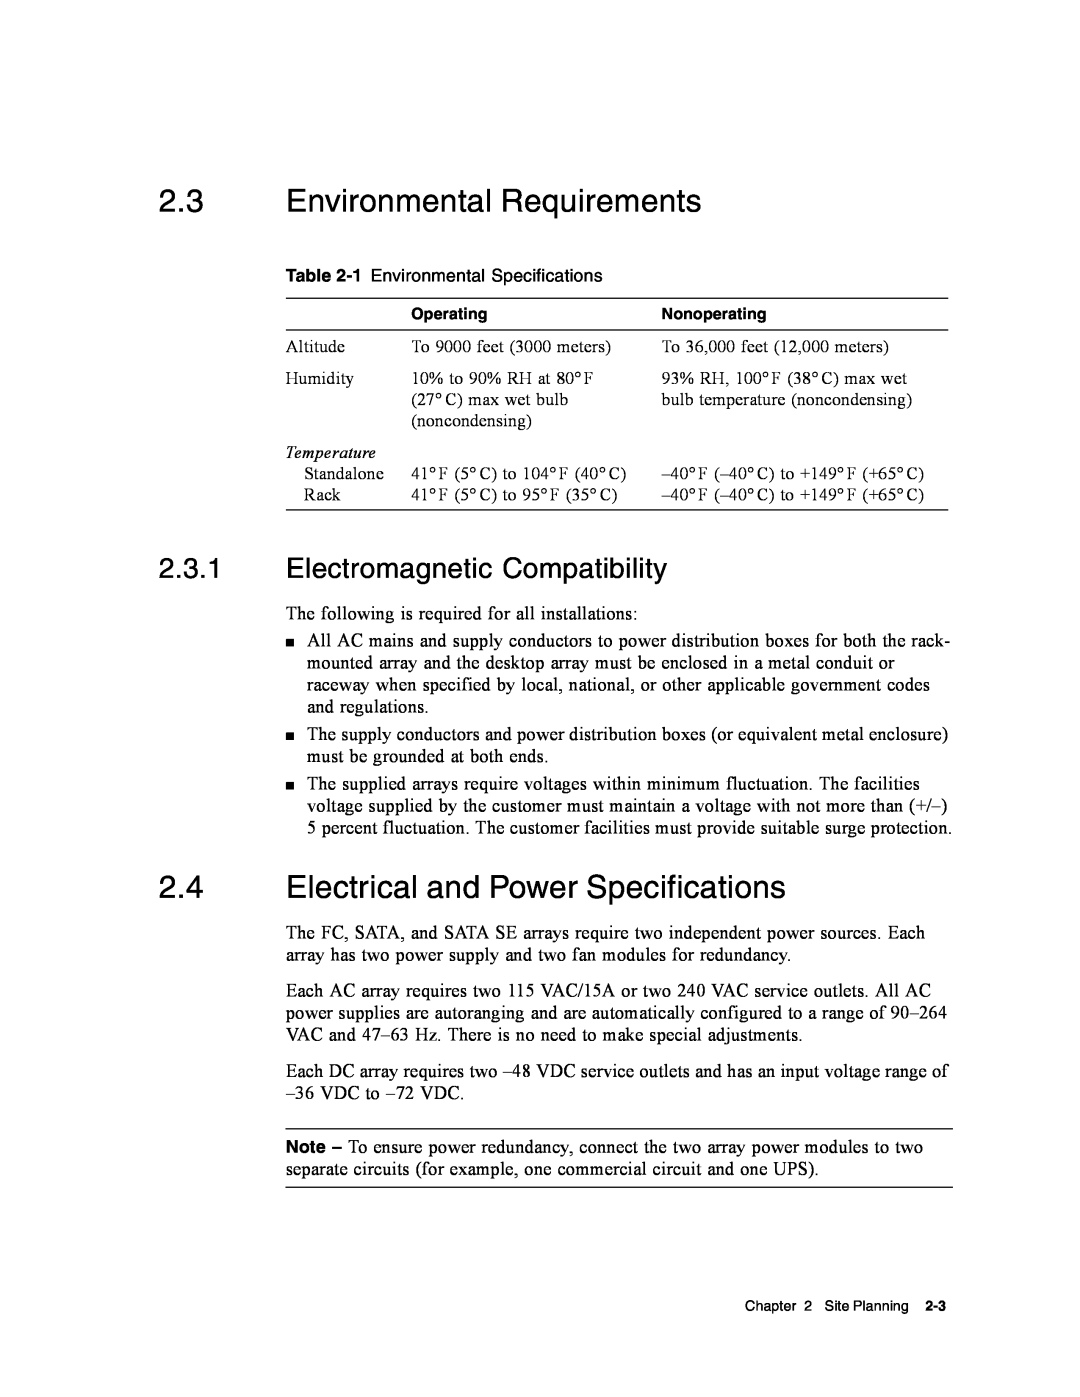 Dot Hill Systems II 200 FC Environmental Requirements, Electrical and Power Specifications, Electromagnetic Compatibility 